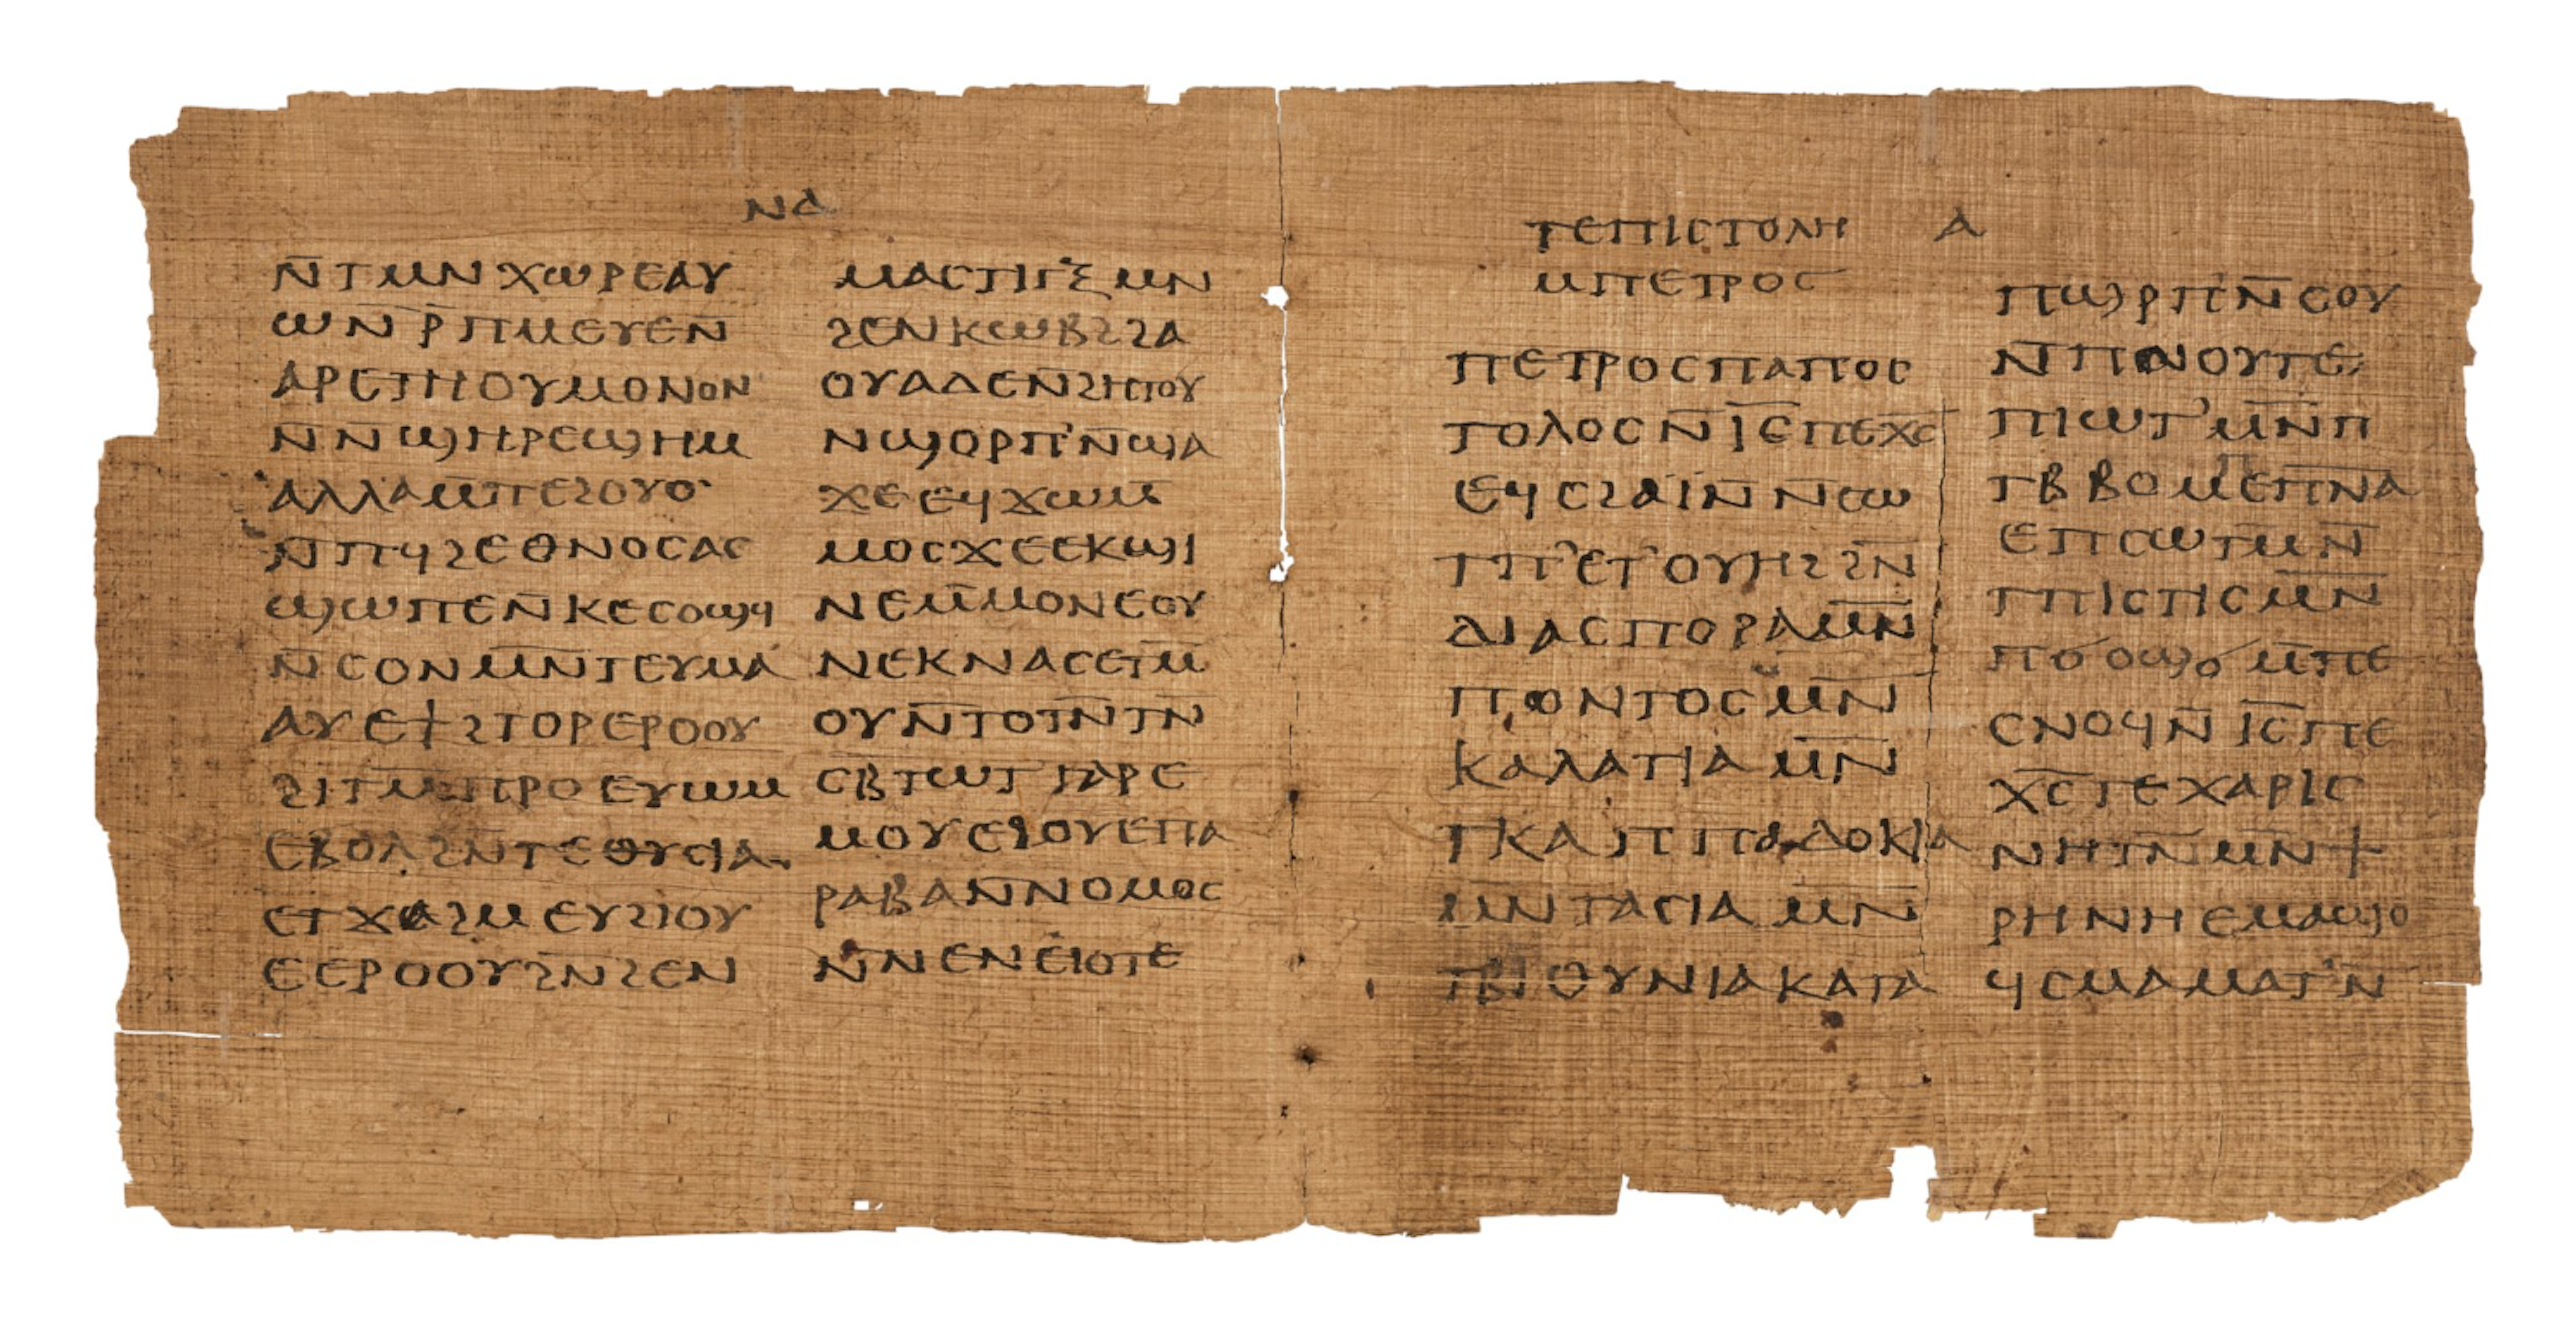 A frangment of an ancient biblical text written in the Coptic language.